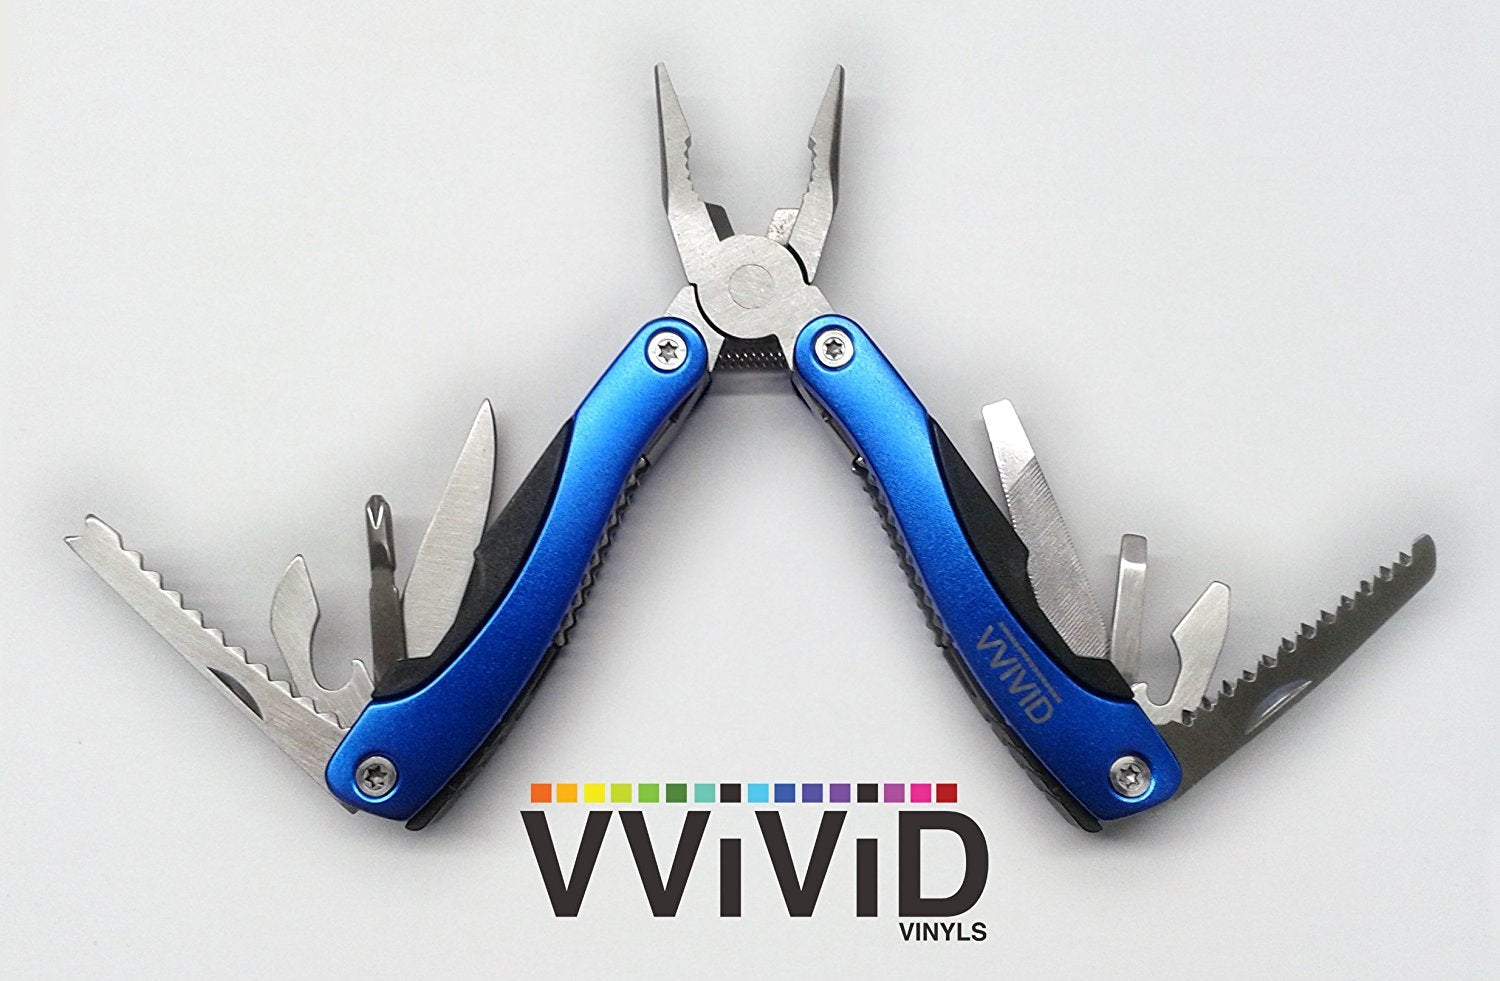 VViViD Stainless Steel Satin Finish Compact Pocket Multi-Tool Including Ballistic Nylon Carrying Case